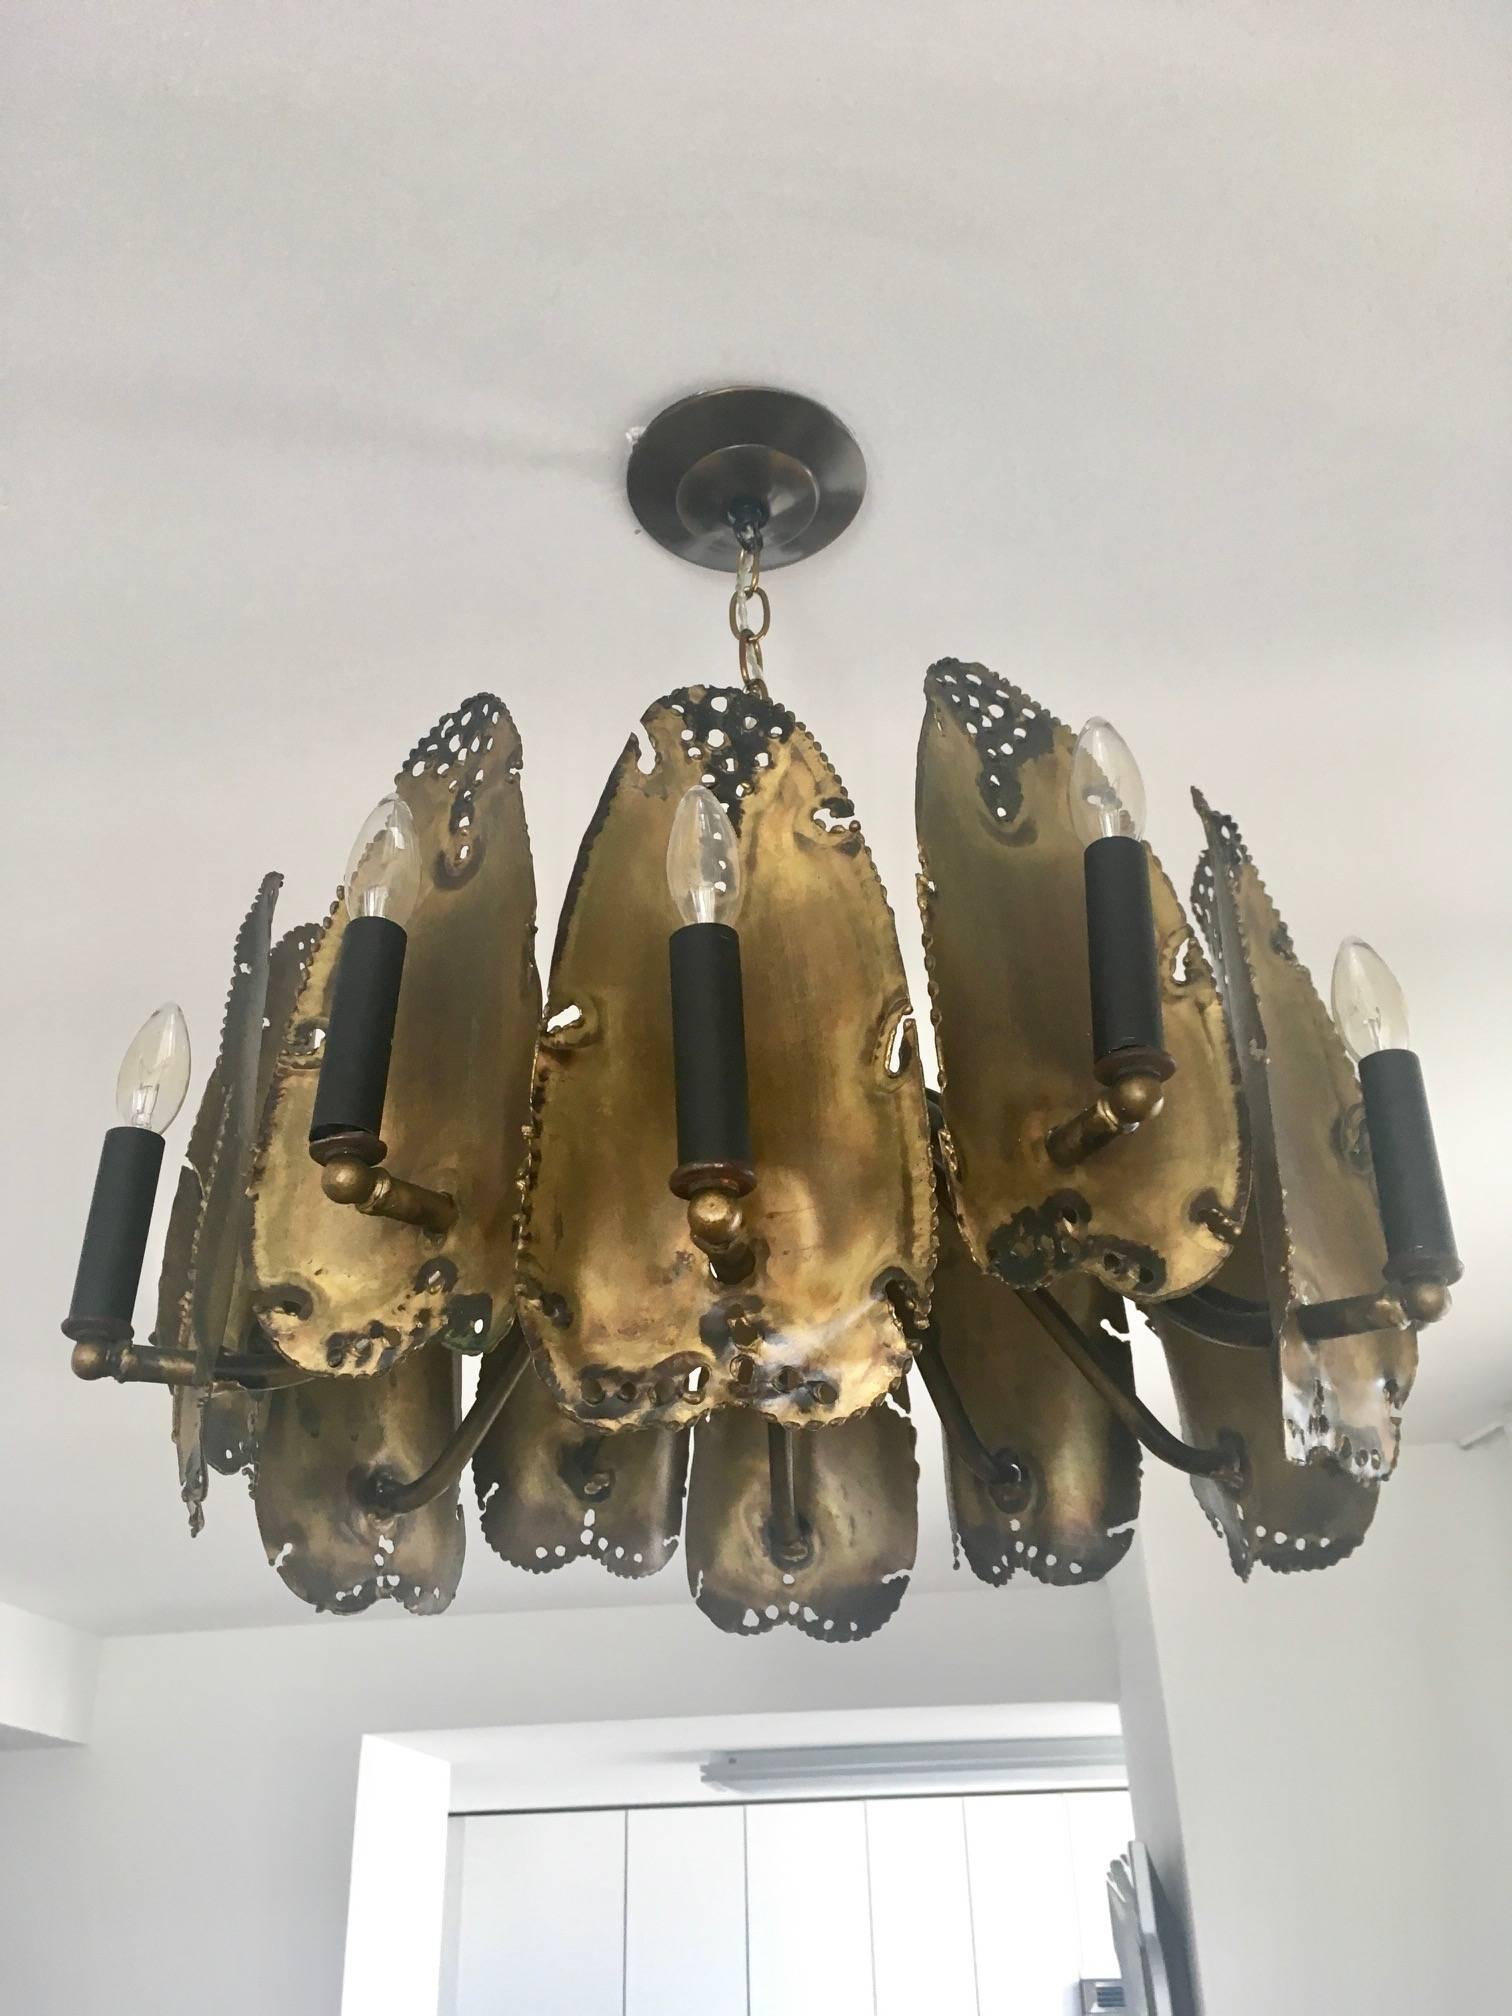 Mid-Century Modern Gothic chandelier with Brutalist design. Made of dark brass with a flame metal finish and pierced metal details. Sculptural design fitted with 12 stylized leaves or shields with patinated accents and fitted with 12 lights.